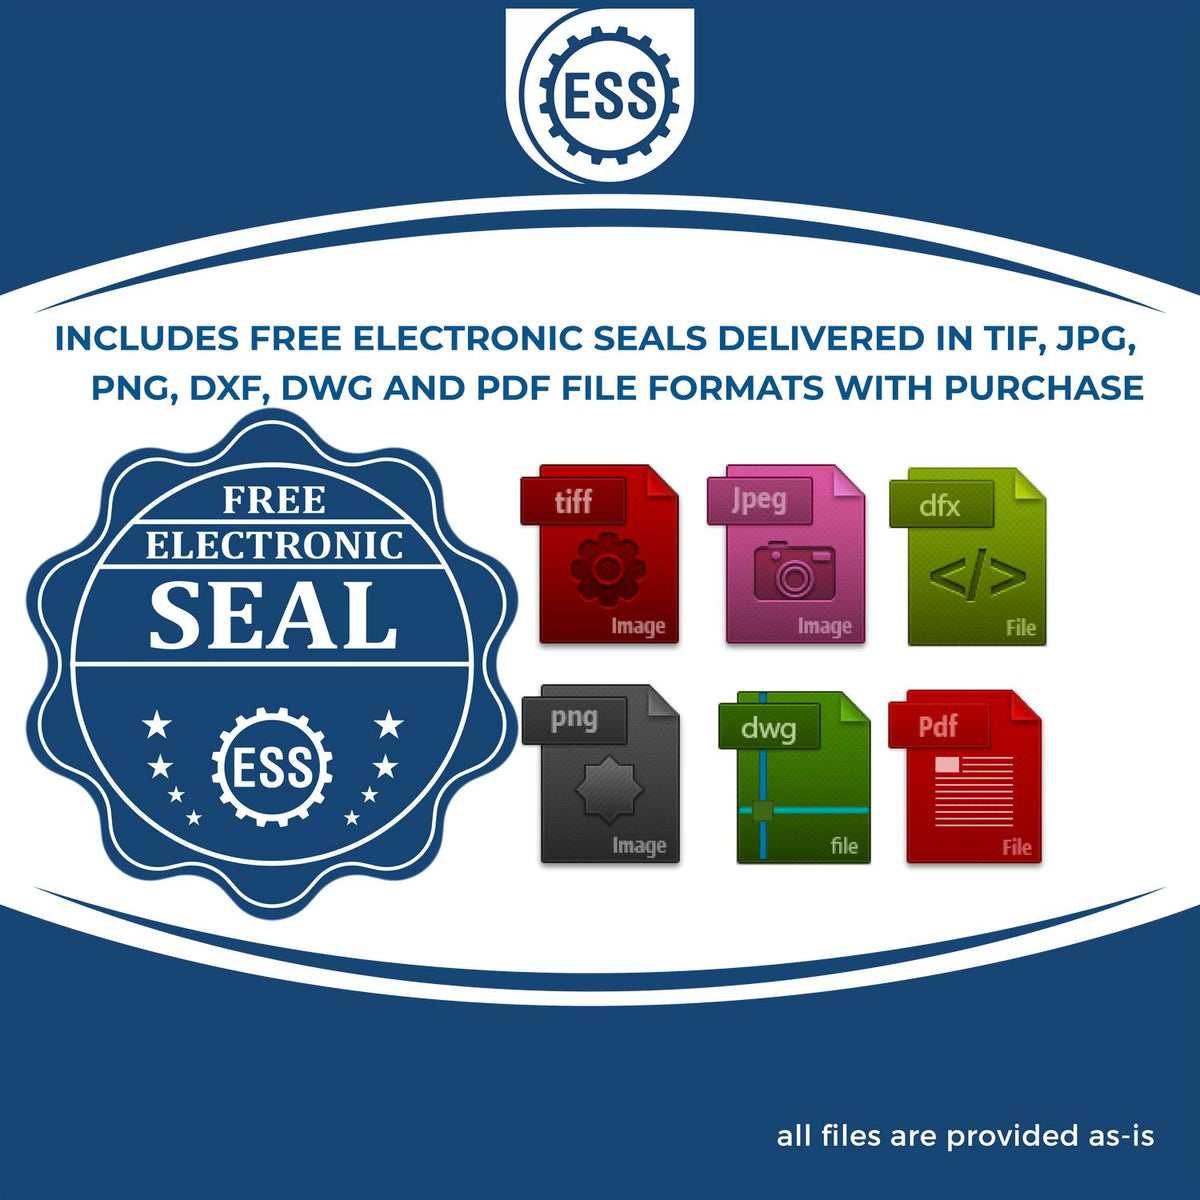 An infographic for the free electronic seal for the Premium MaxLight Pre-Inked Maine Engineering Stamp illustrating the different file type icons such as DXF, DWG, TIF, JPG and PNG.